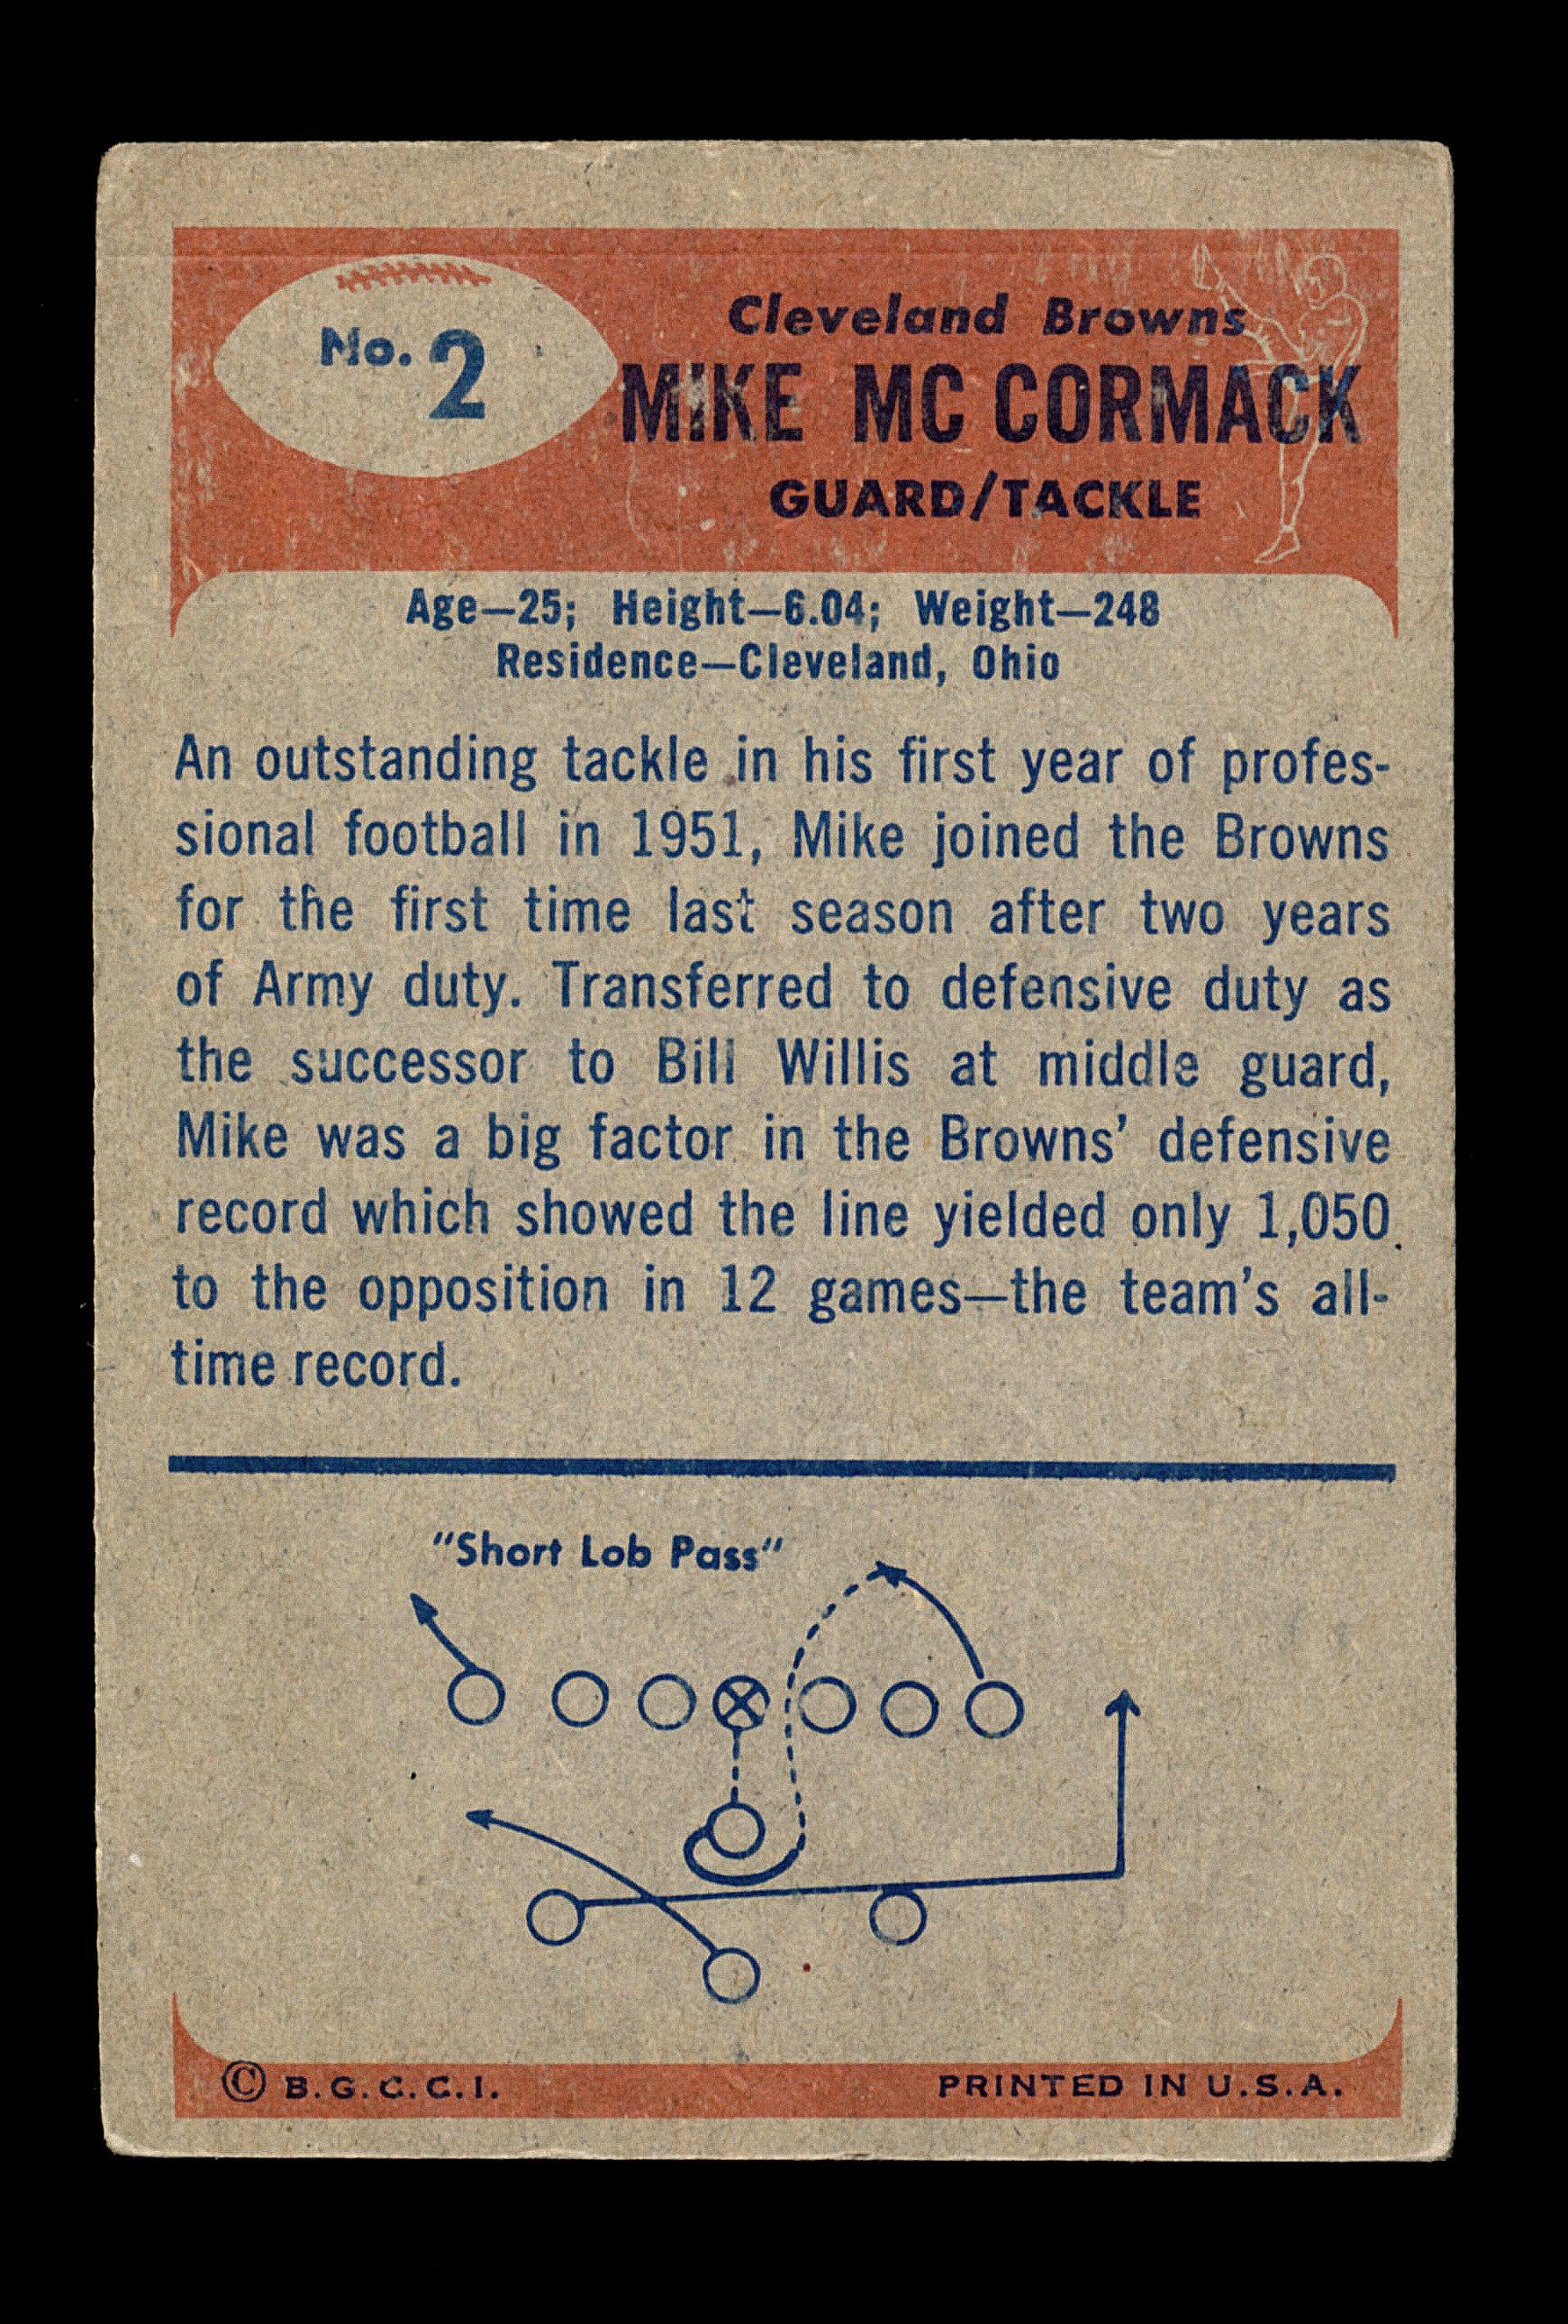 1955 Bowman ROOKIE Football Card #2 Rookie Hall of Famer Mike McCormack Cle